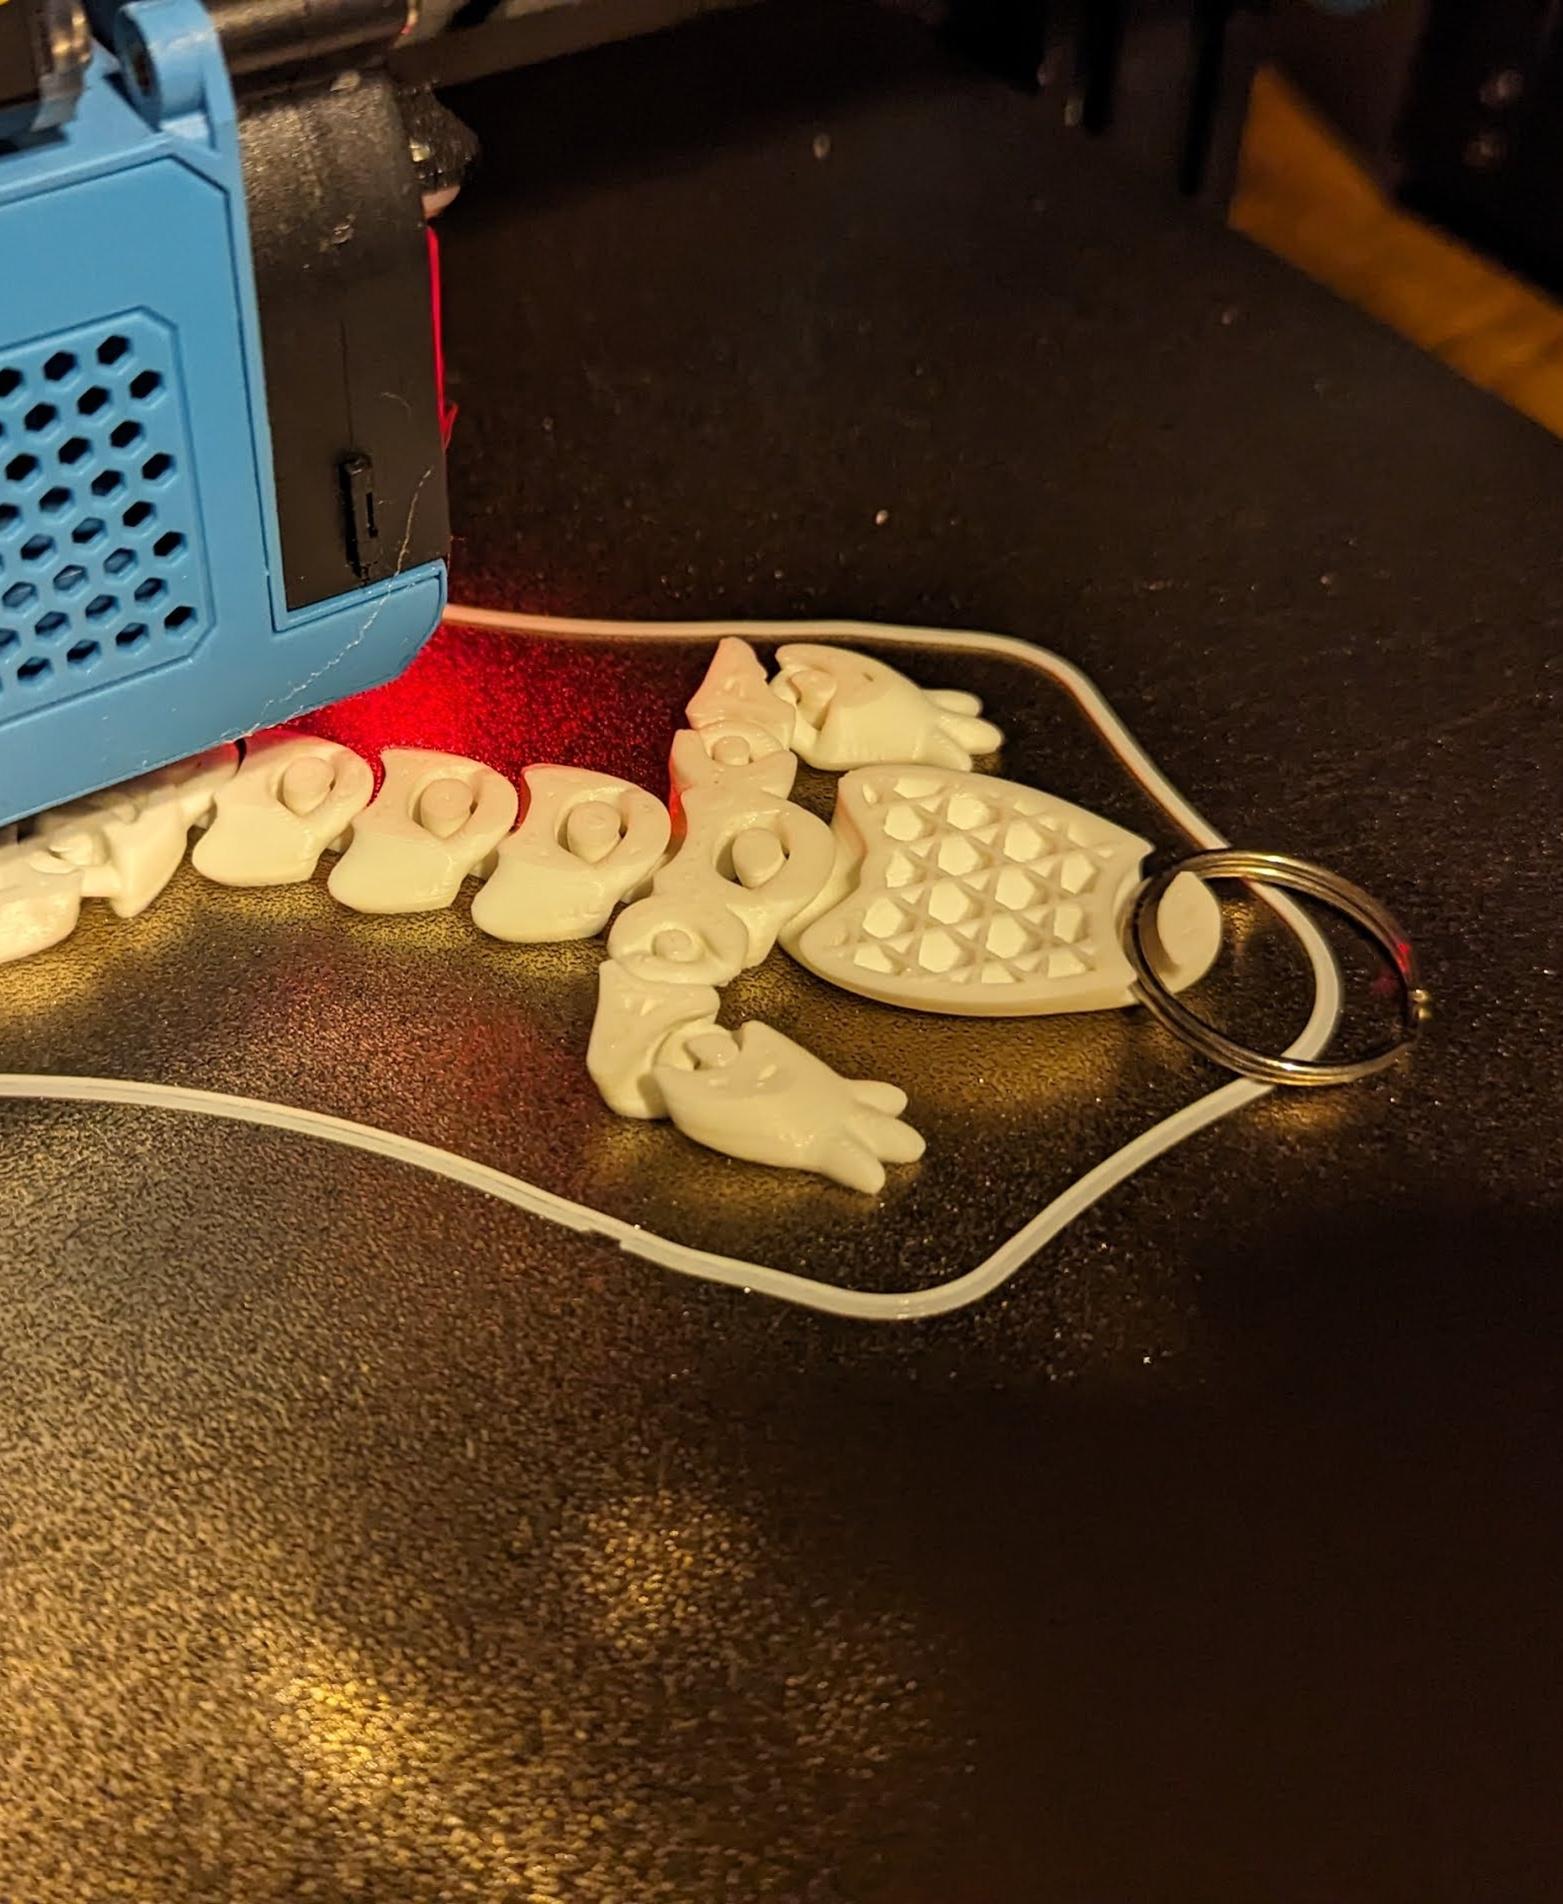 ARTICULATED DRAGON KEYCHAIN 001 - Print in place - STL Files - Added keyring during print effortlessly :D - 3d model